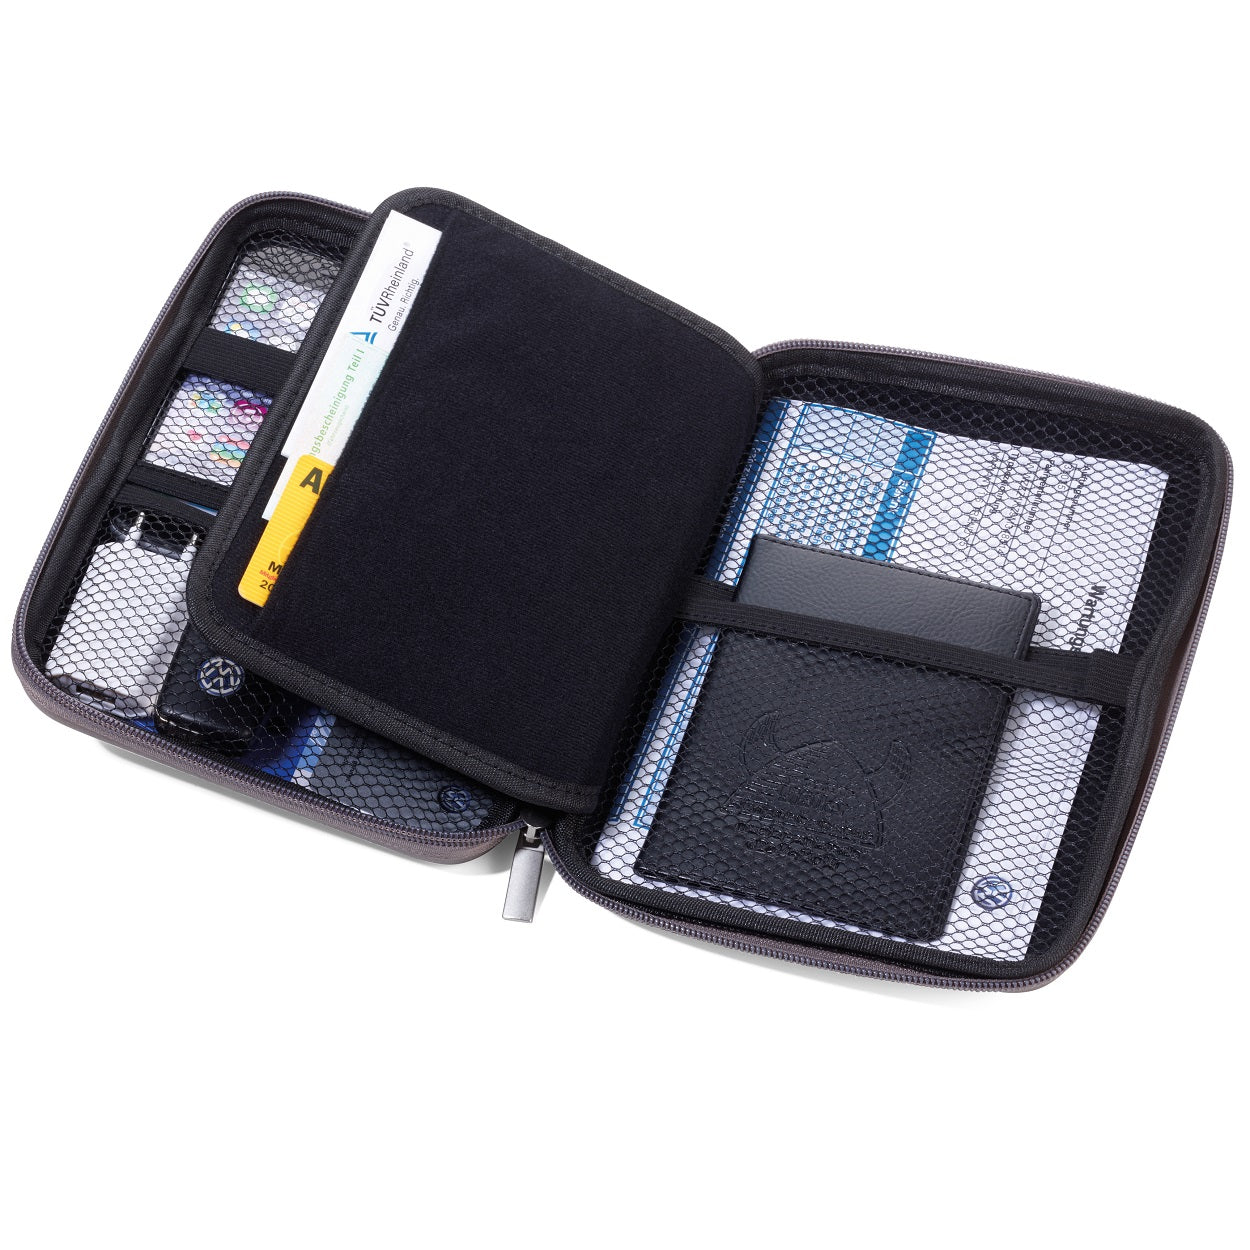 TROIKA Organiser Case for Car Documents and Supplies VW TRAVEL CASE